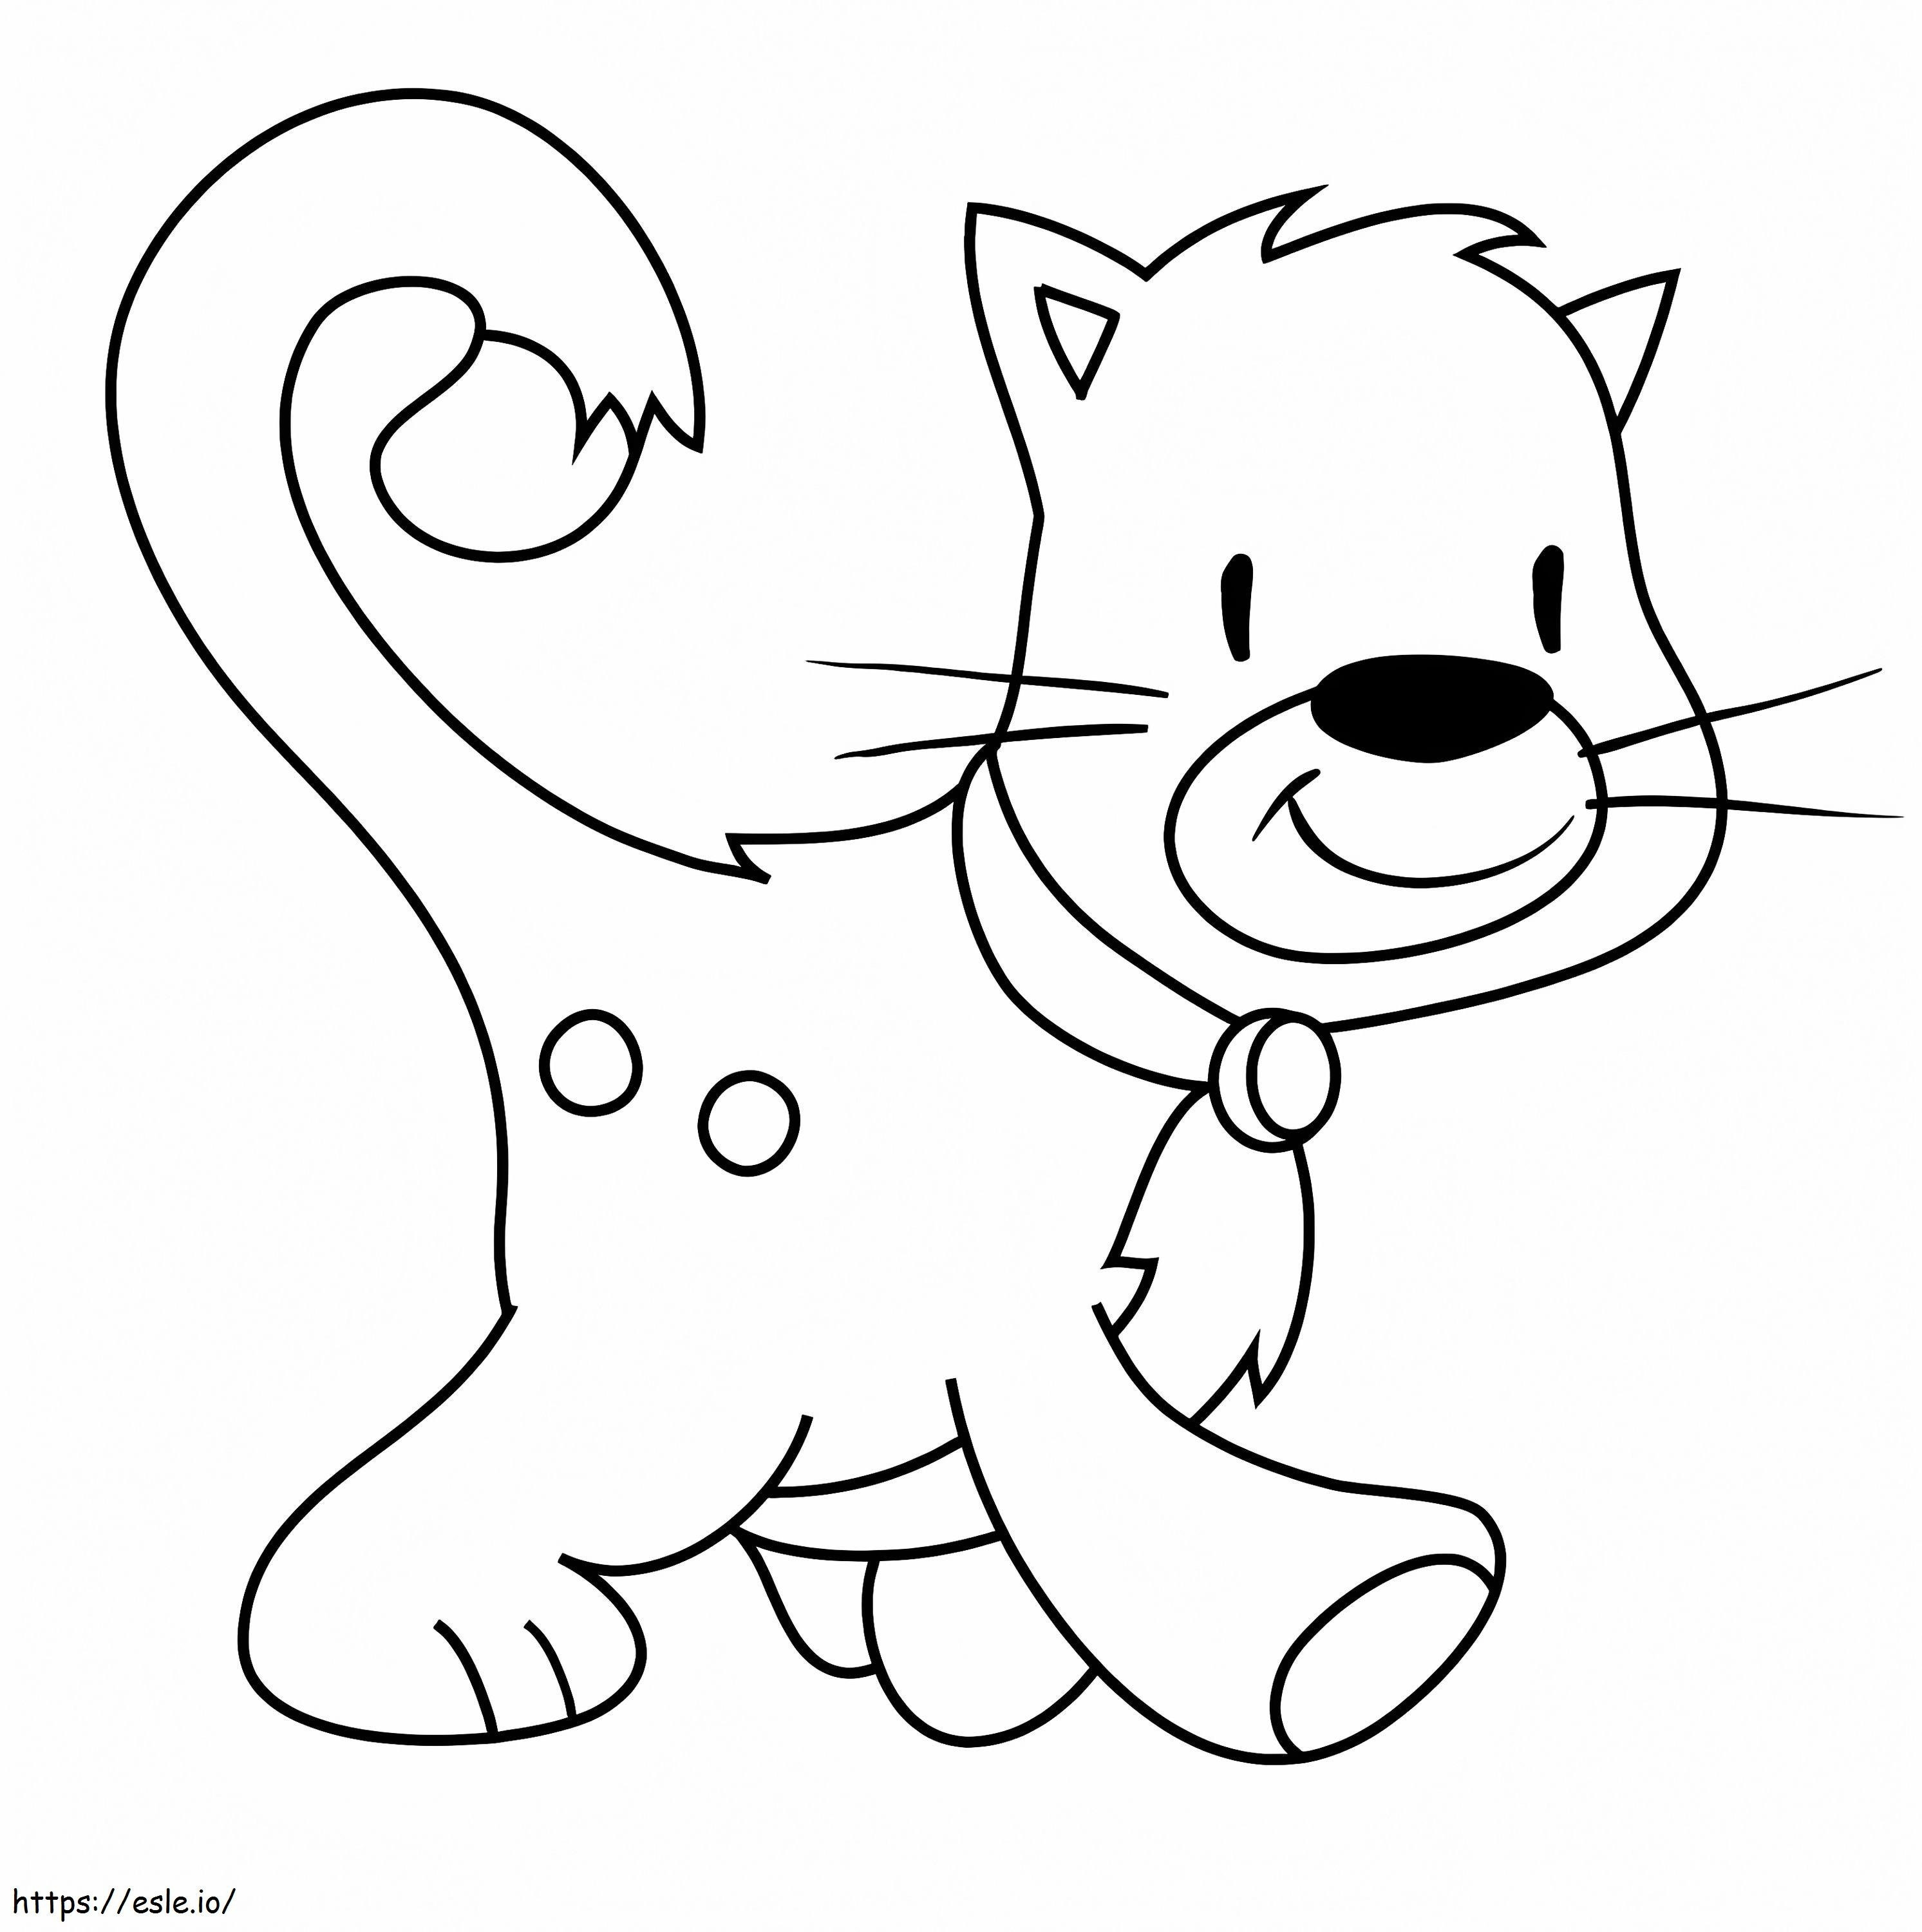 Cat Smiling coloring page